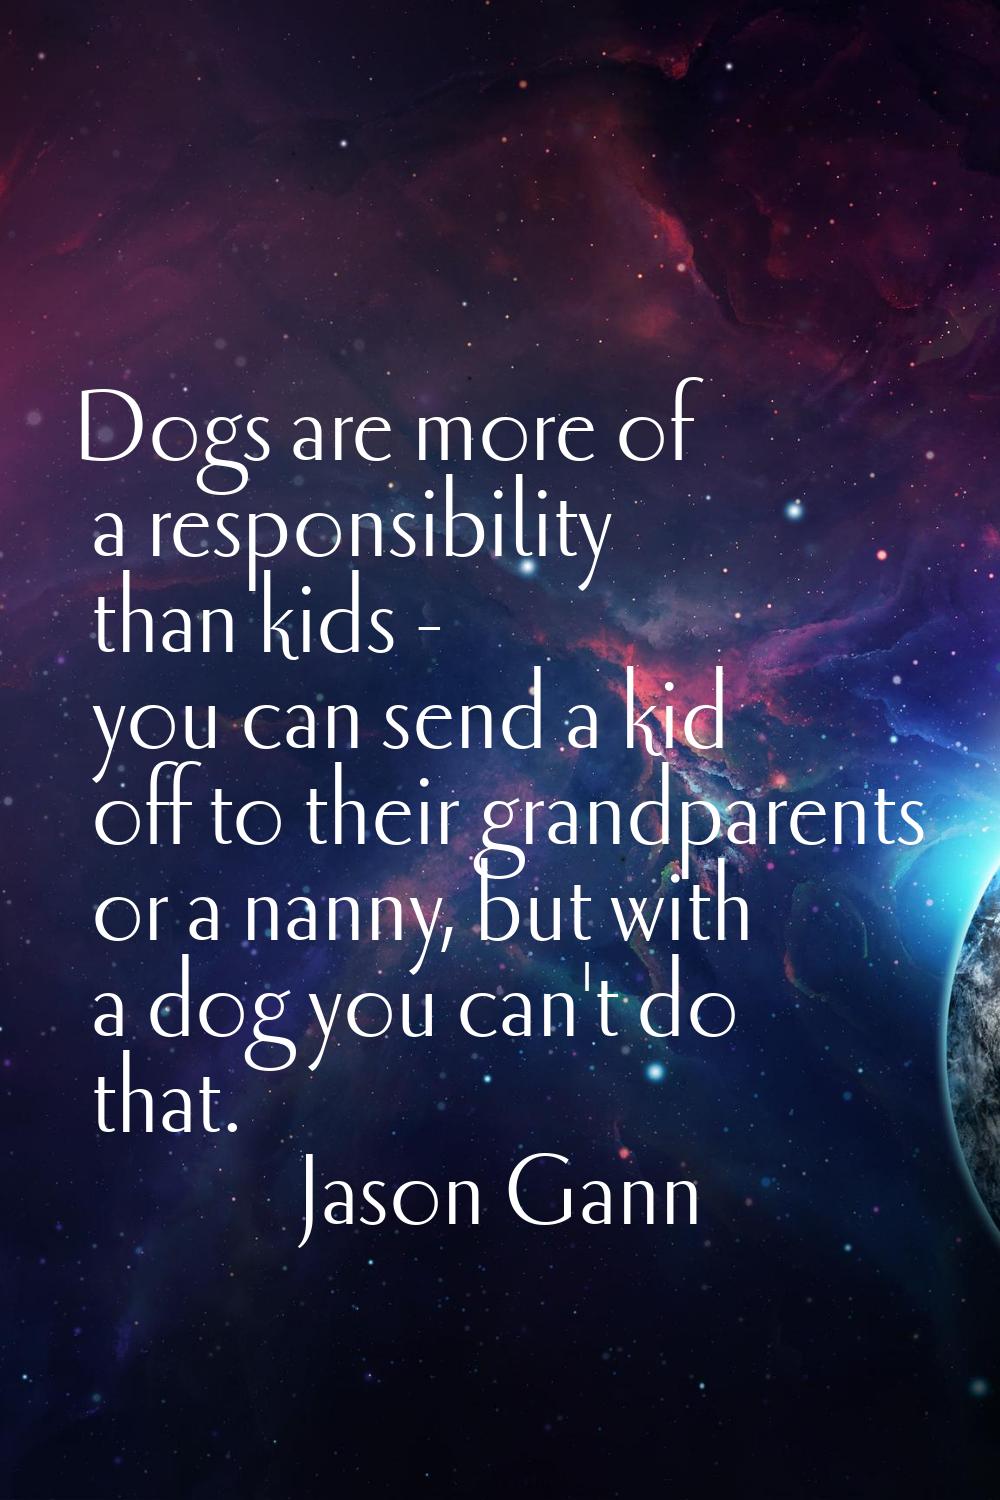 Dogs are more of a responsibility than kids - you can send a kid off to their grandparents or a nan